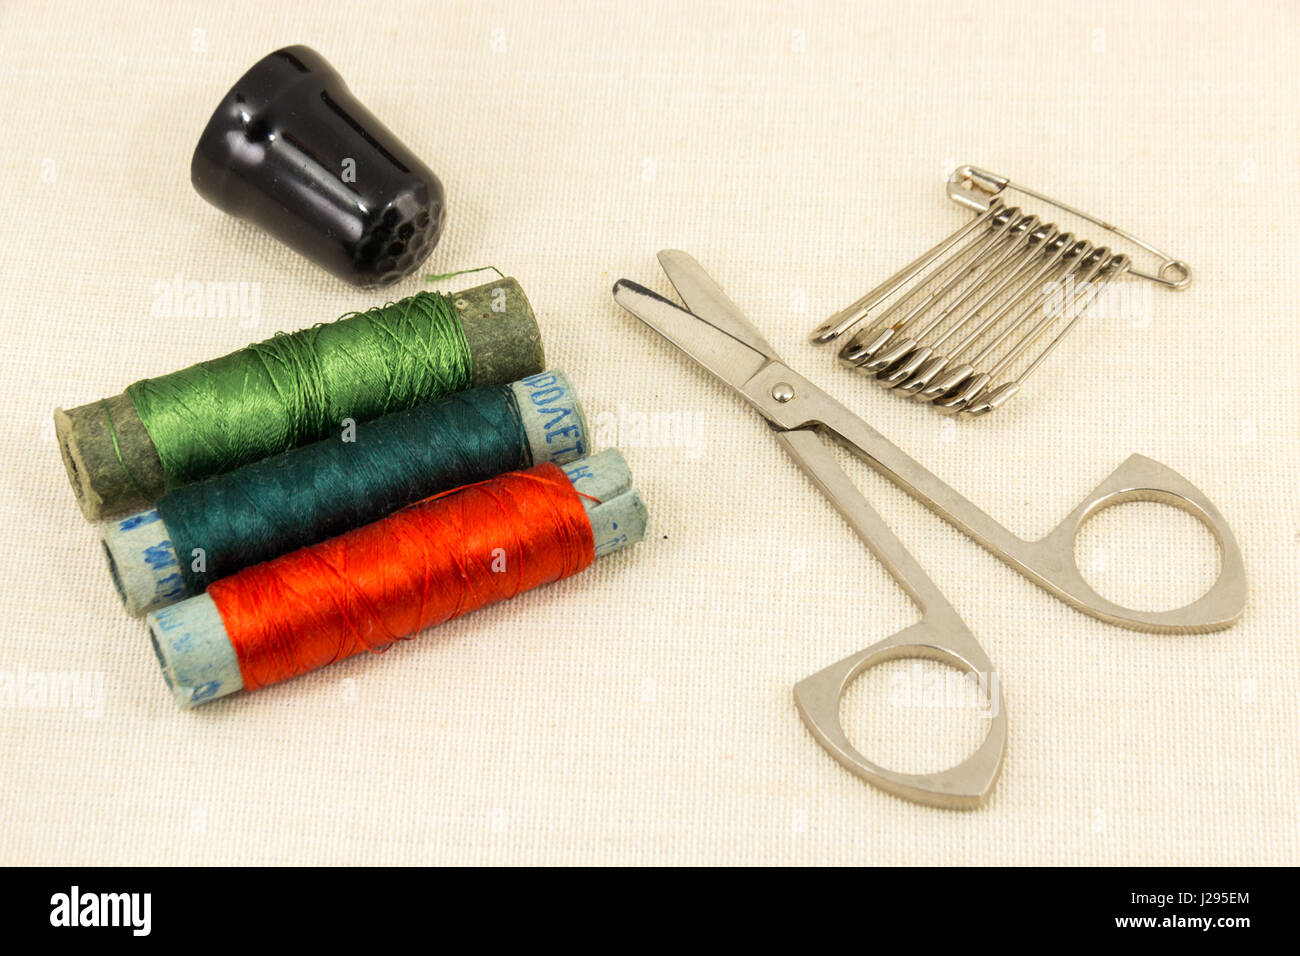 Beautifully laid out accessories for needlework on a fabric background Stock Photo